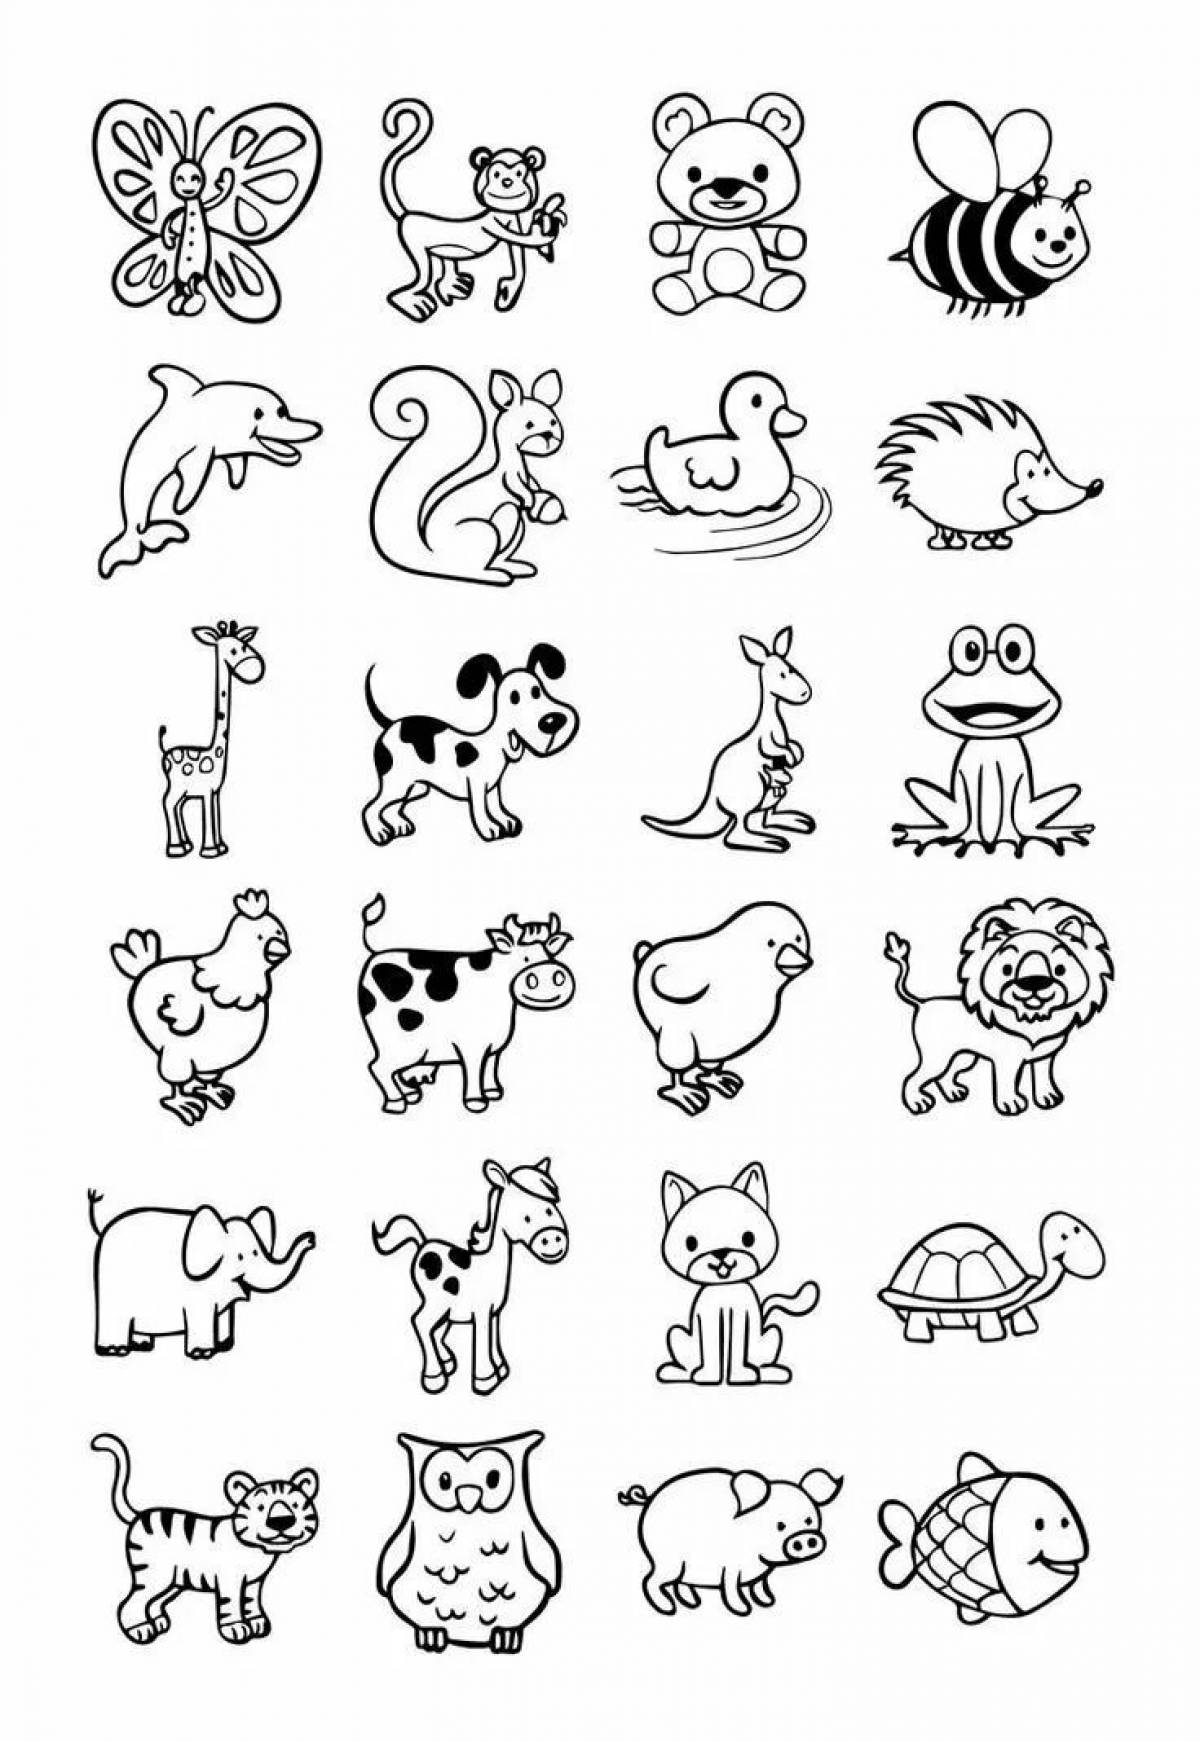 Color-frenzy coloring page small for kids